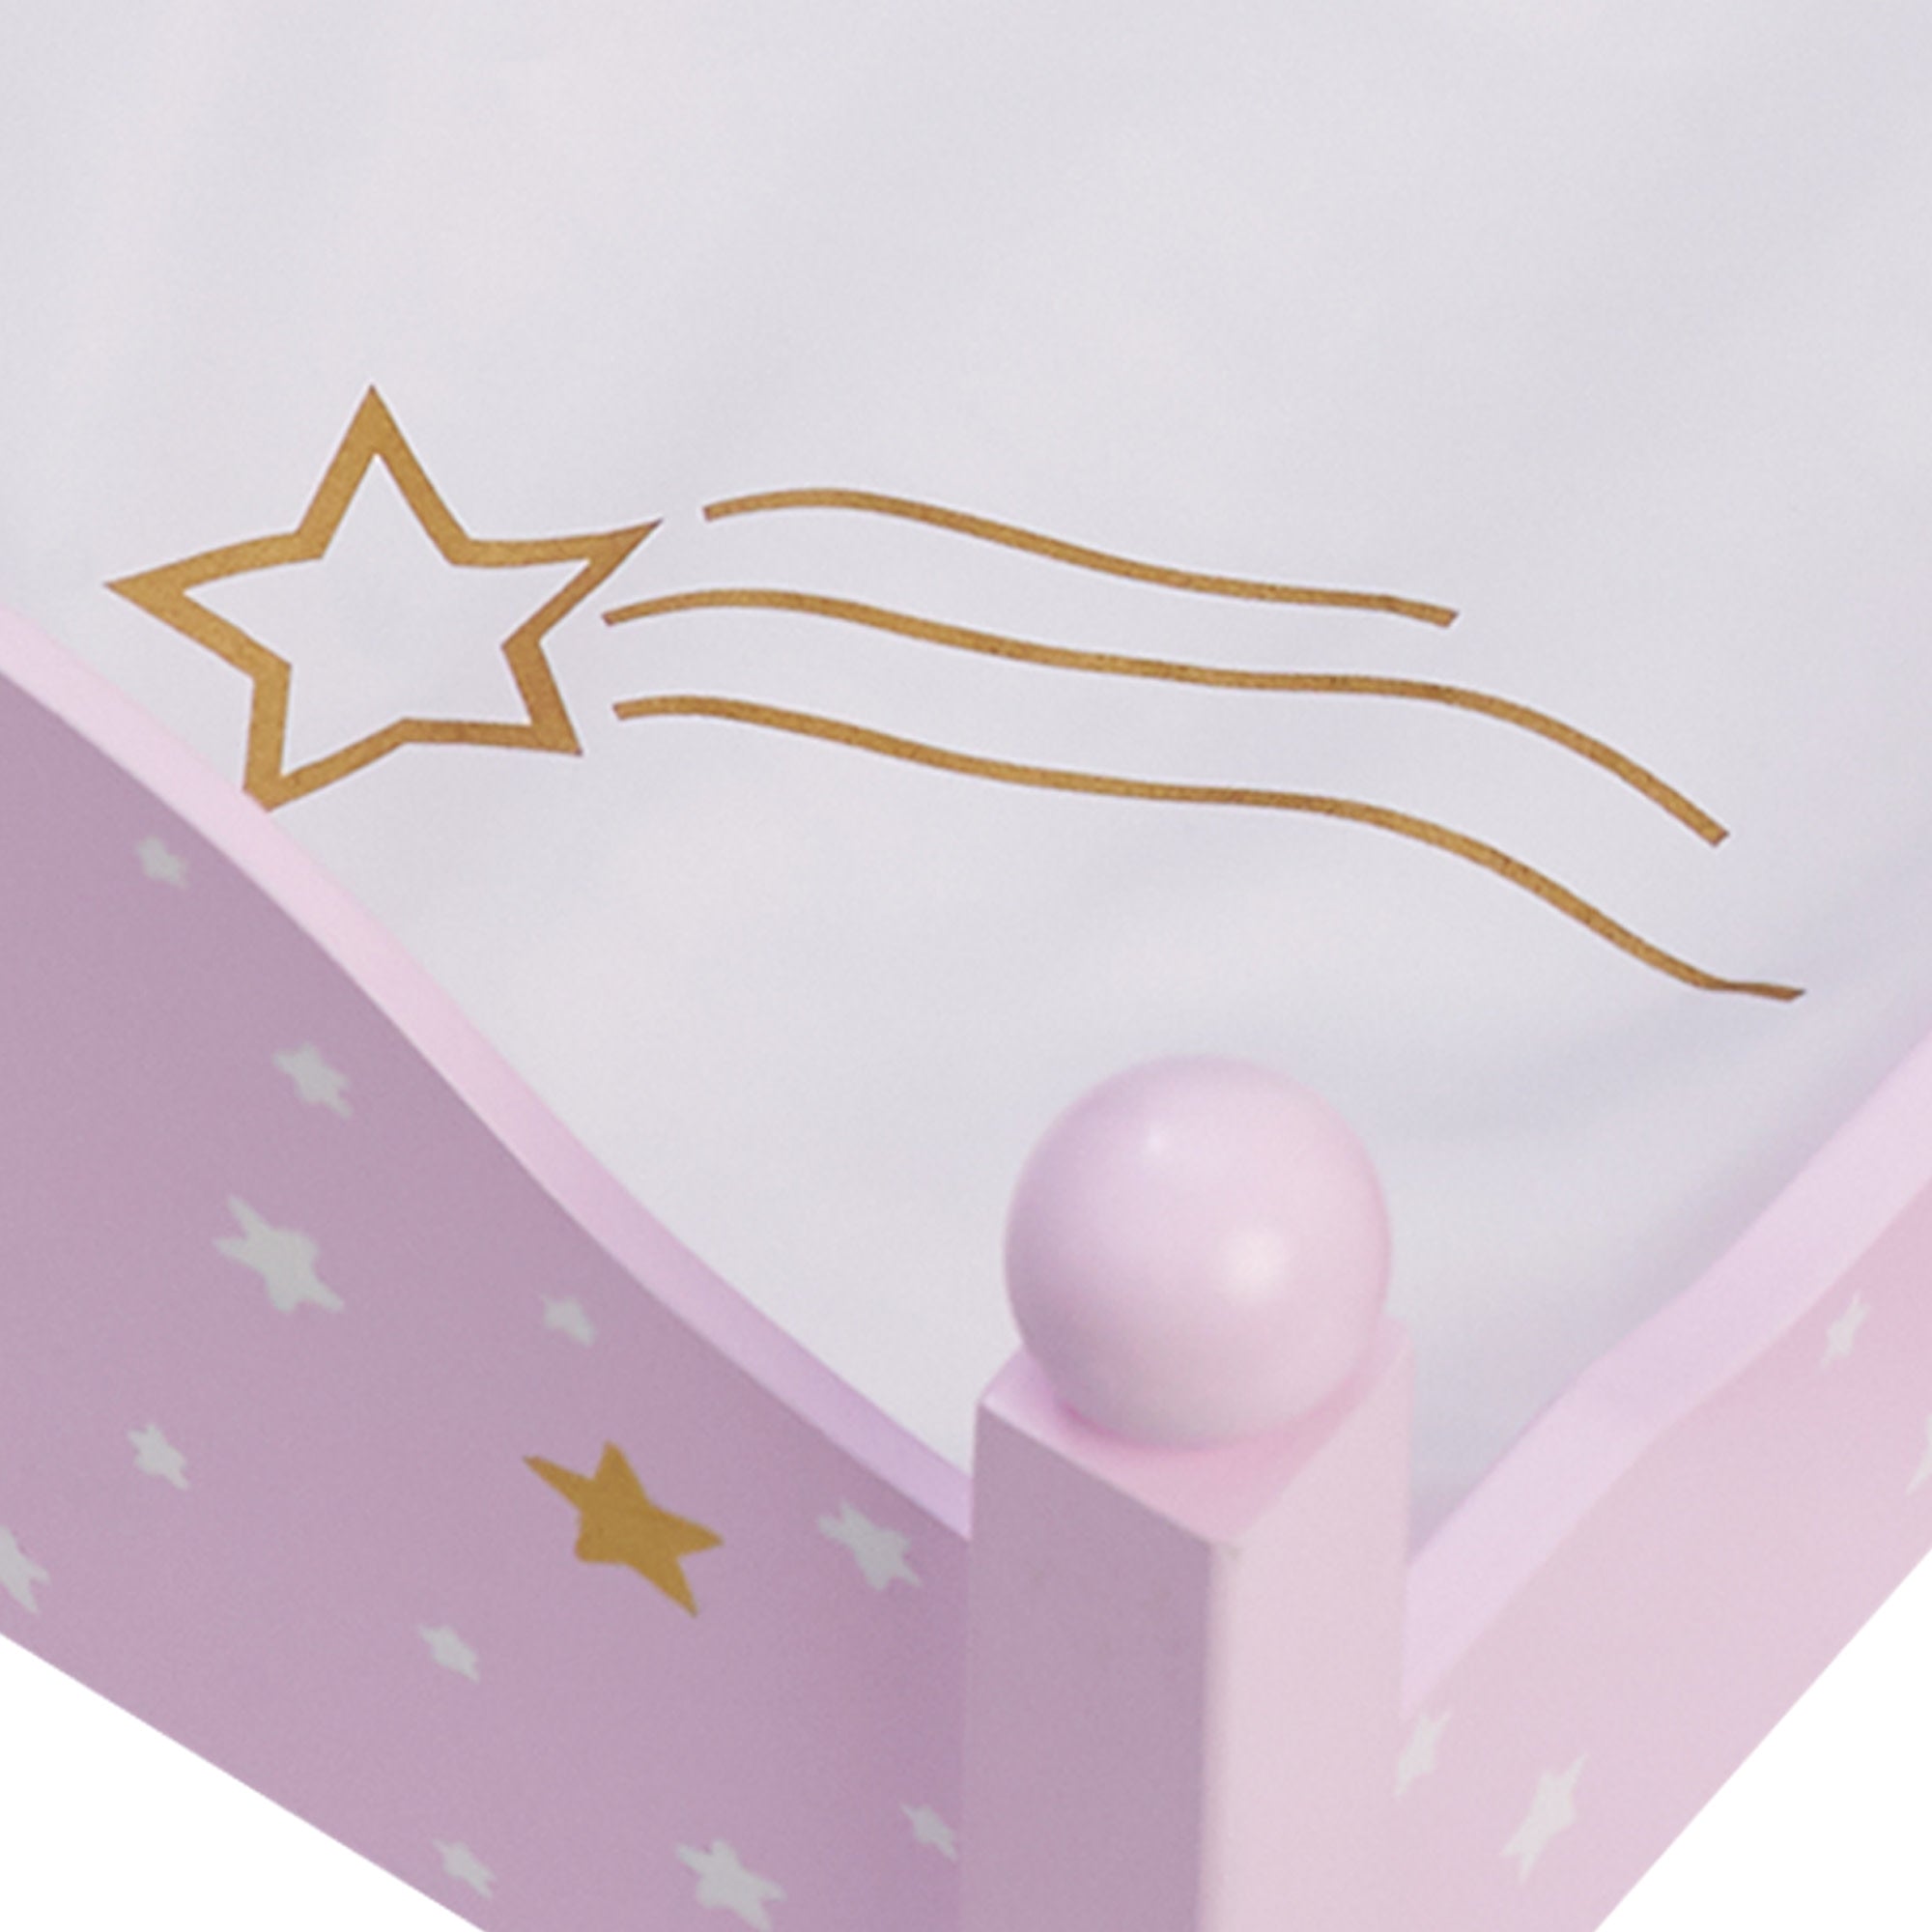 Olivia's Little World Twinkle Stars Princess Double Bunk Bed for 18" Dolls, Pink